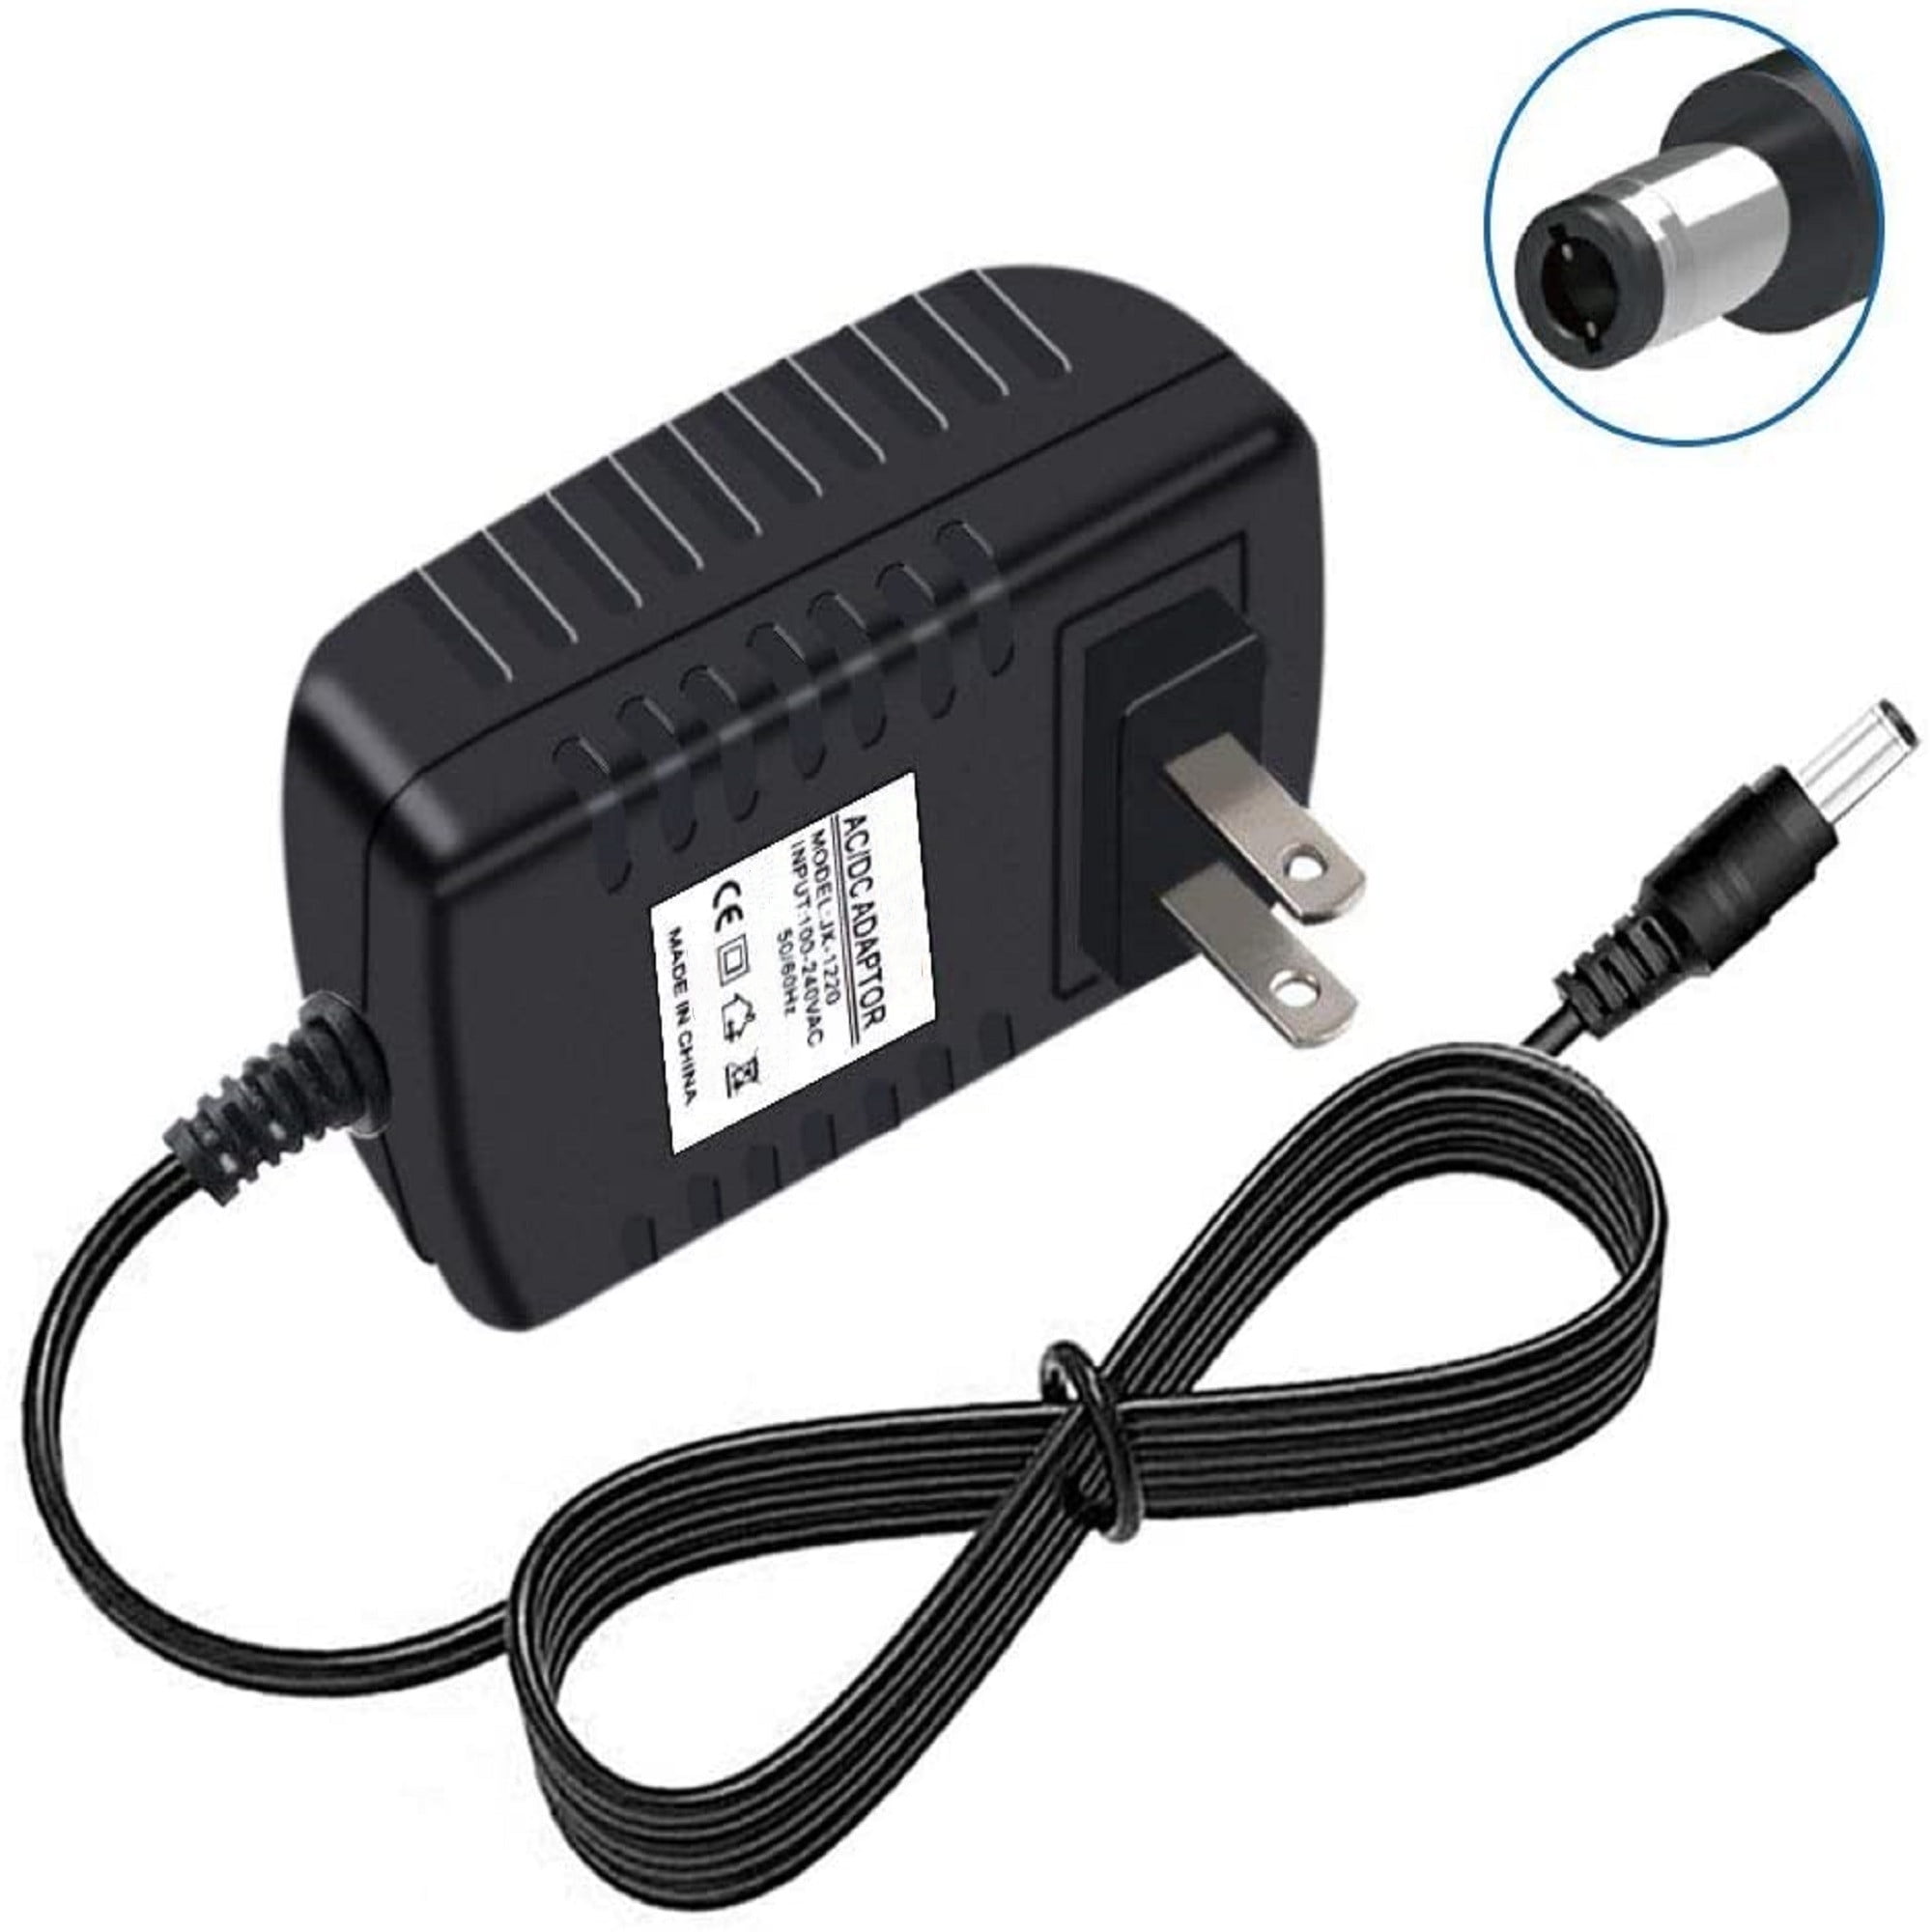 KONKIN BOO Replacement 10V 1A AC Adapter Charger for Yamaha PA-3 10V 700mA Power Supply VF10380/VF10410 